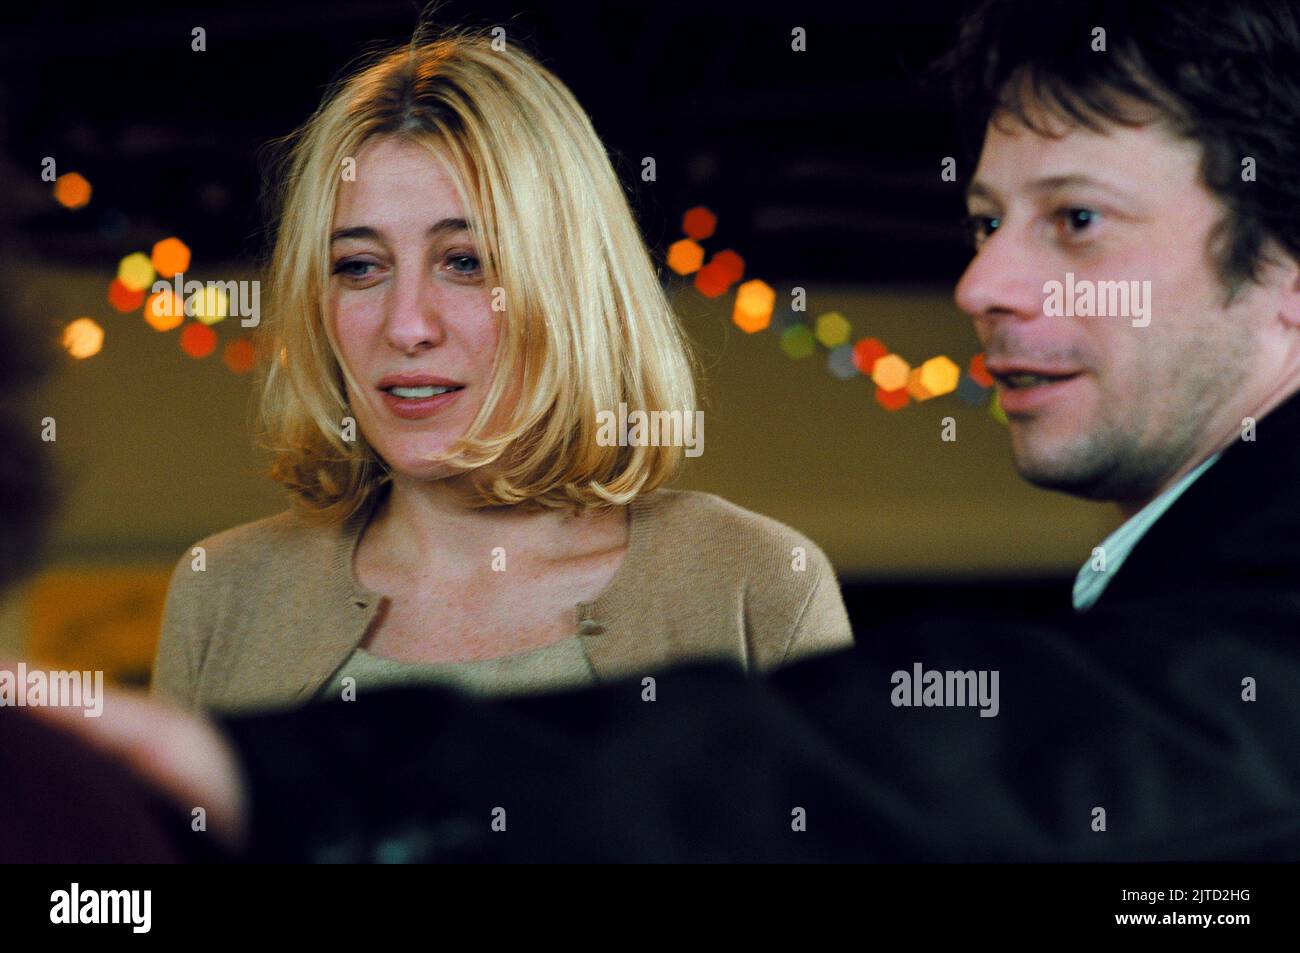 TEDESCHI,AMALRIC, ACTRESSES : DREAMS OF THE NIGHT BEFORE, 2007 Stock Photo